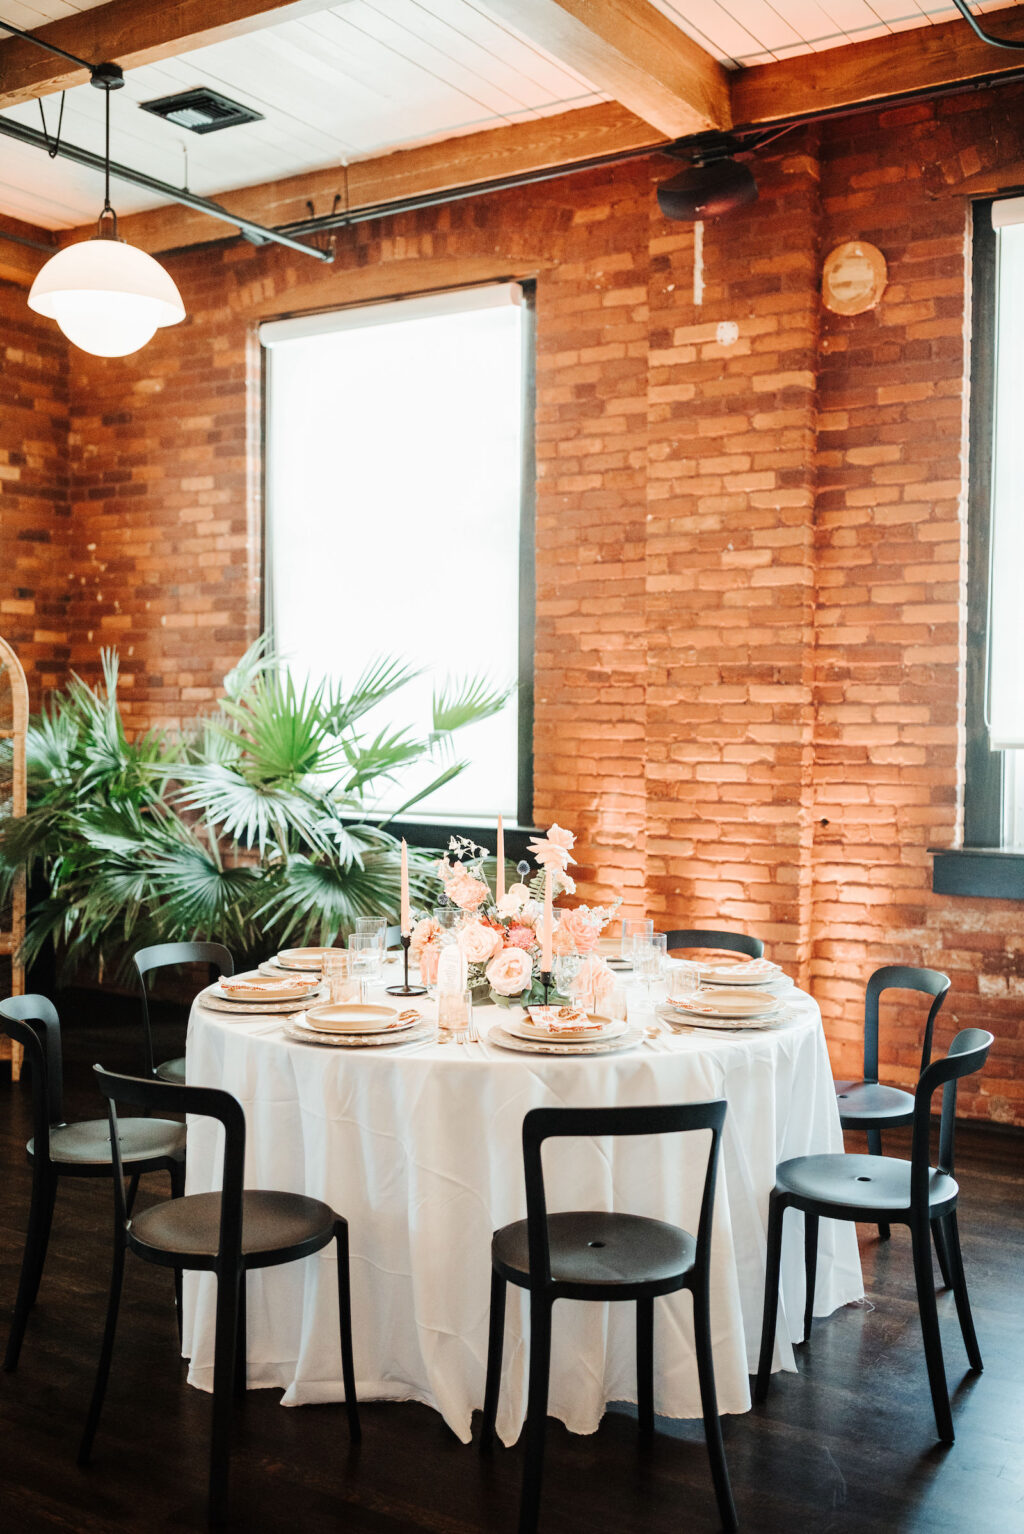 Industrial Indoor Wedding Reception White Linens, Black Metal Chairs, and Red Brick Walls | JC Newman Cigar Factory Tampa Florida Wedding Venue